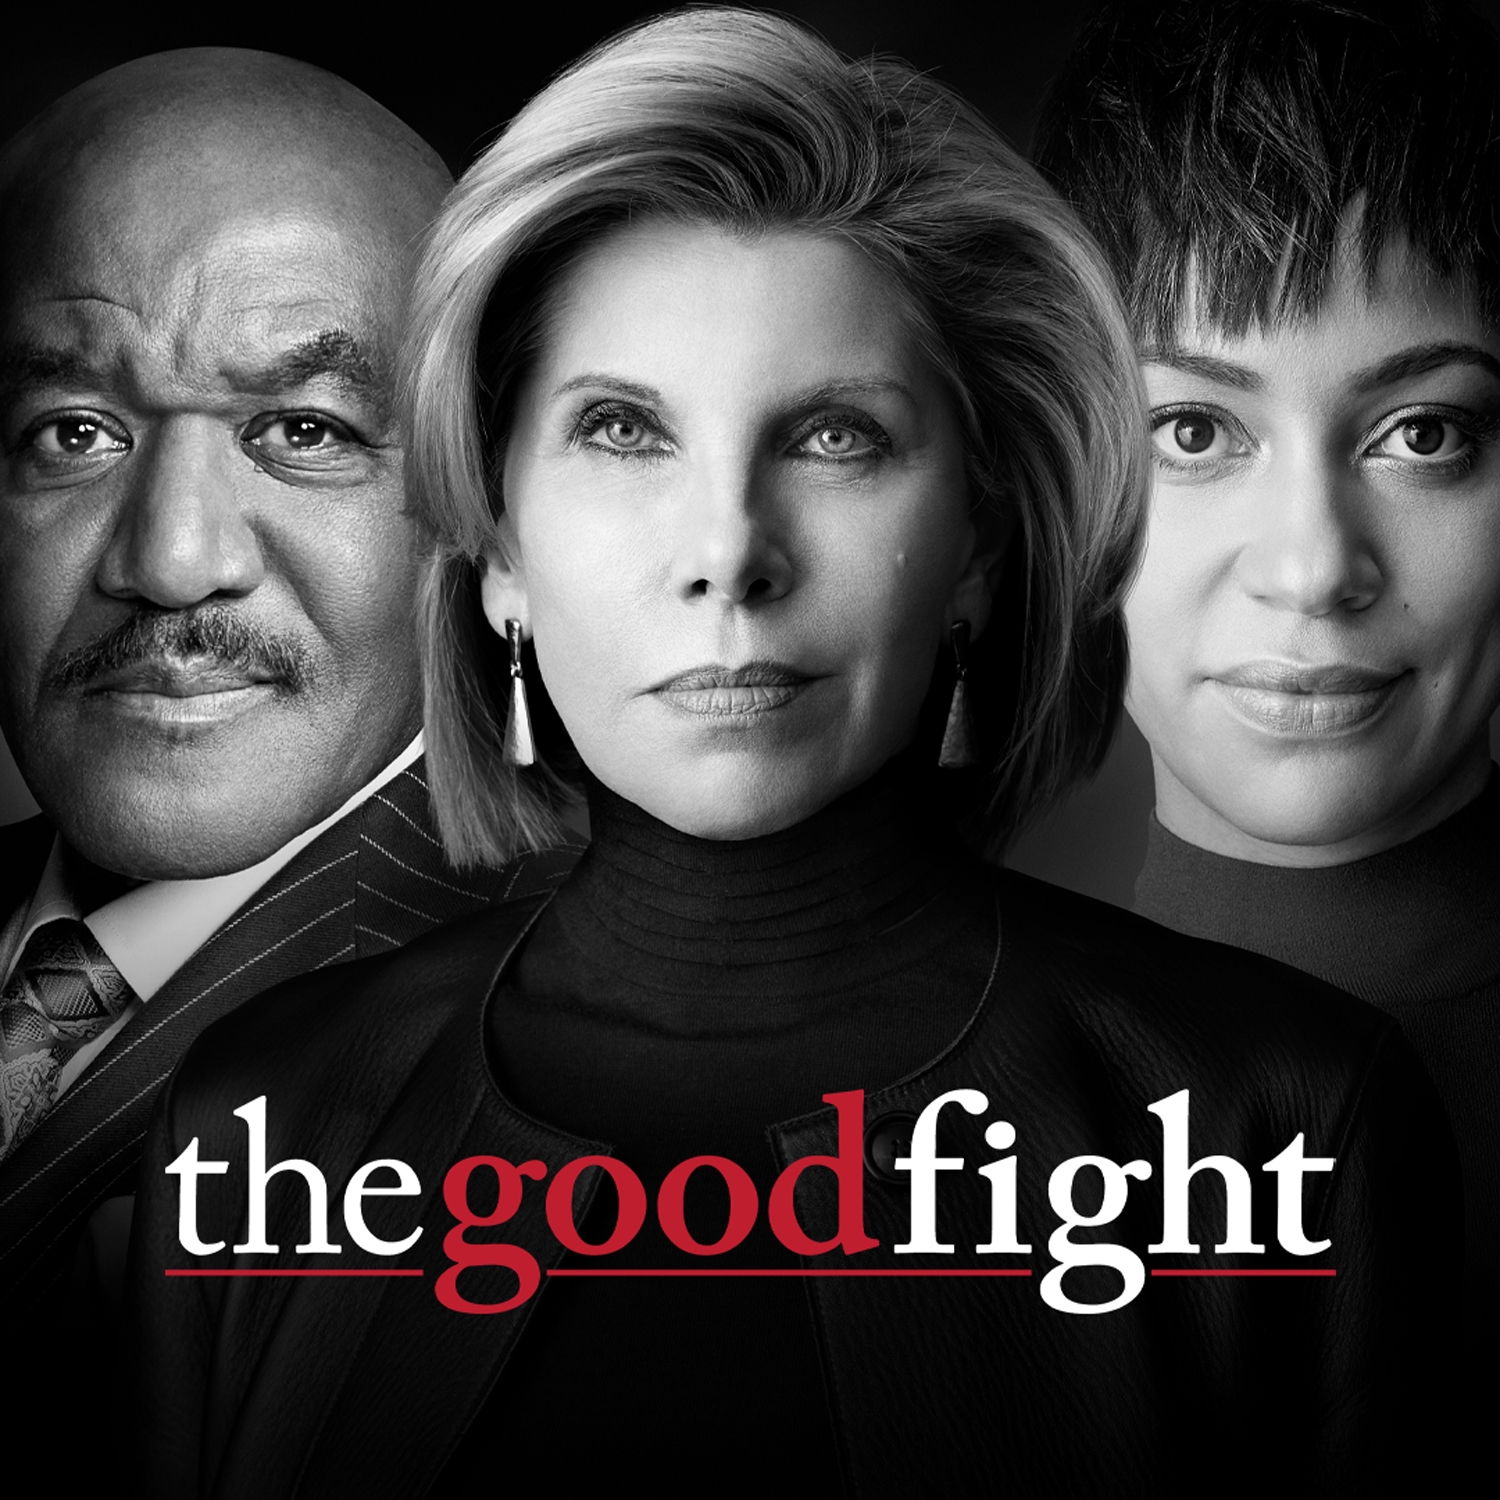 Where can i watch the good fight online for free Watch The Good Fight Online Stream Seasons 1 3 Now Stan